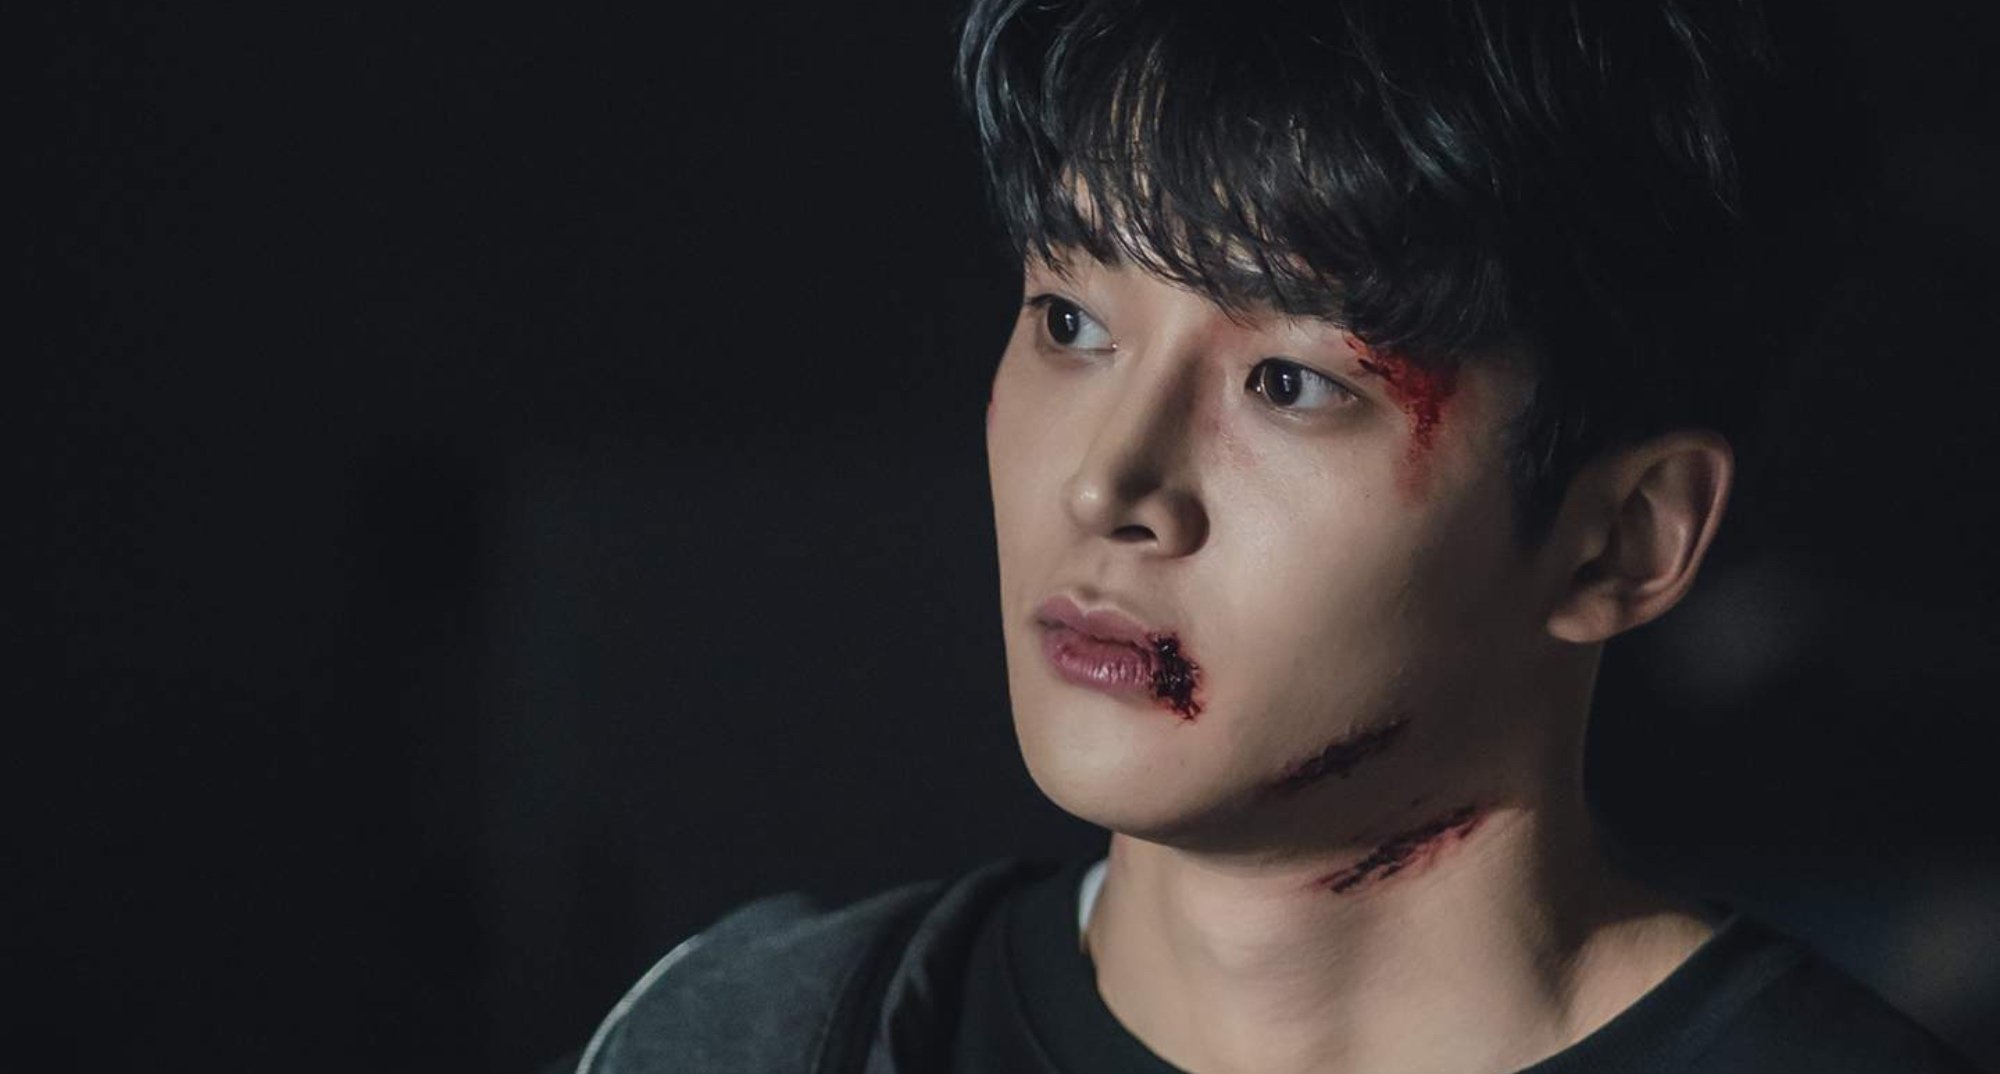 Jun-woong in 'Tomorrow' Episode 8 with bloody face.